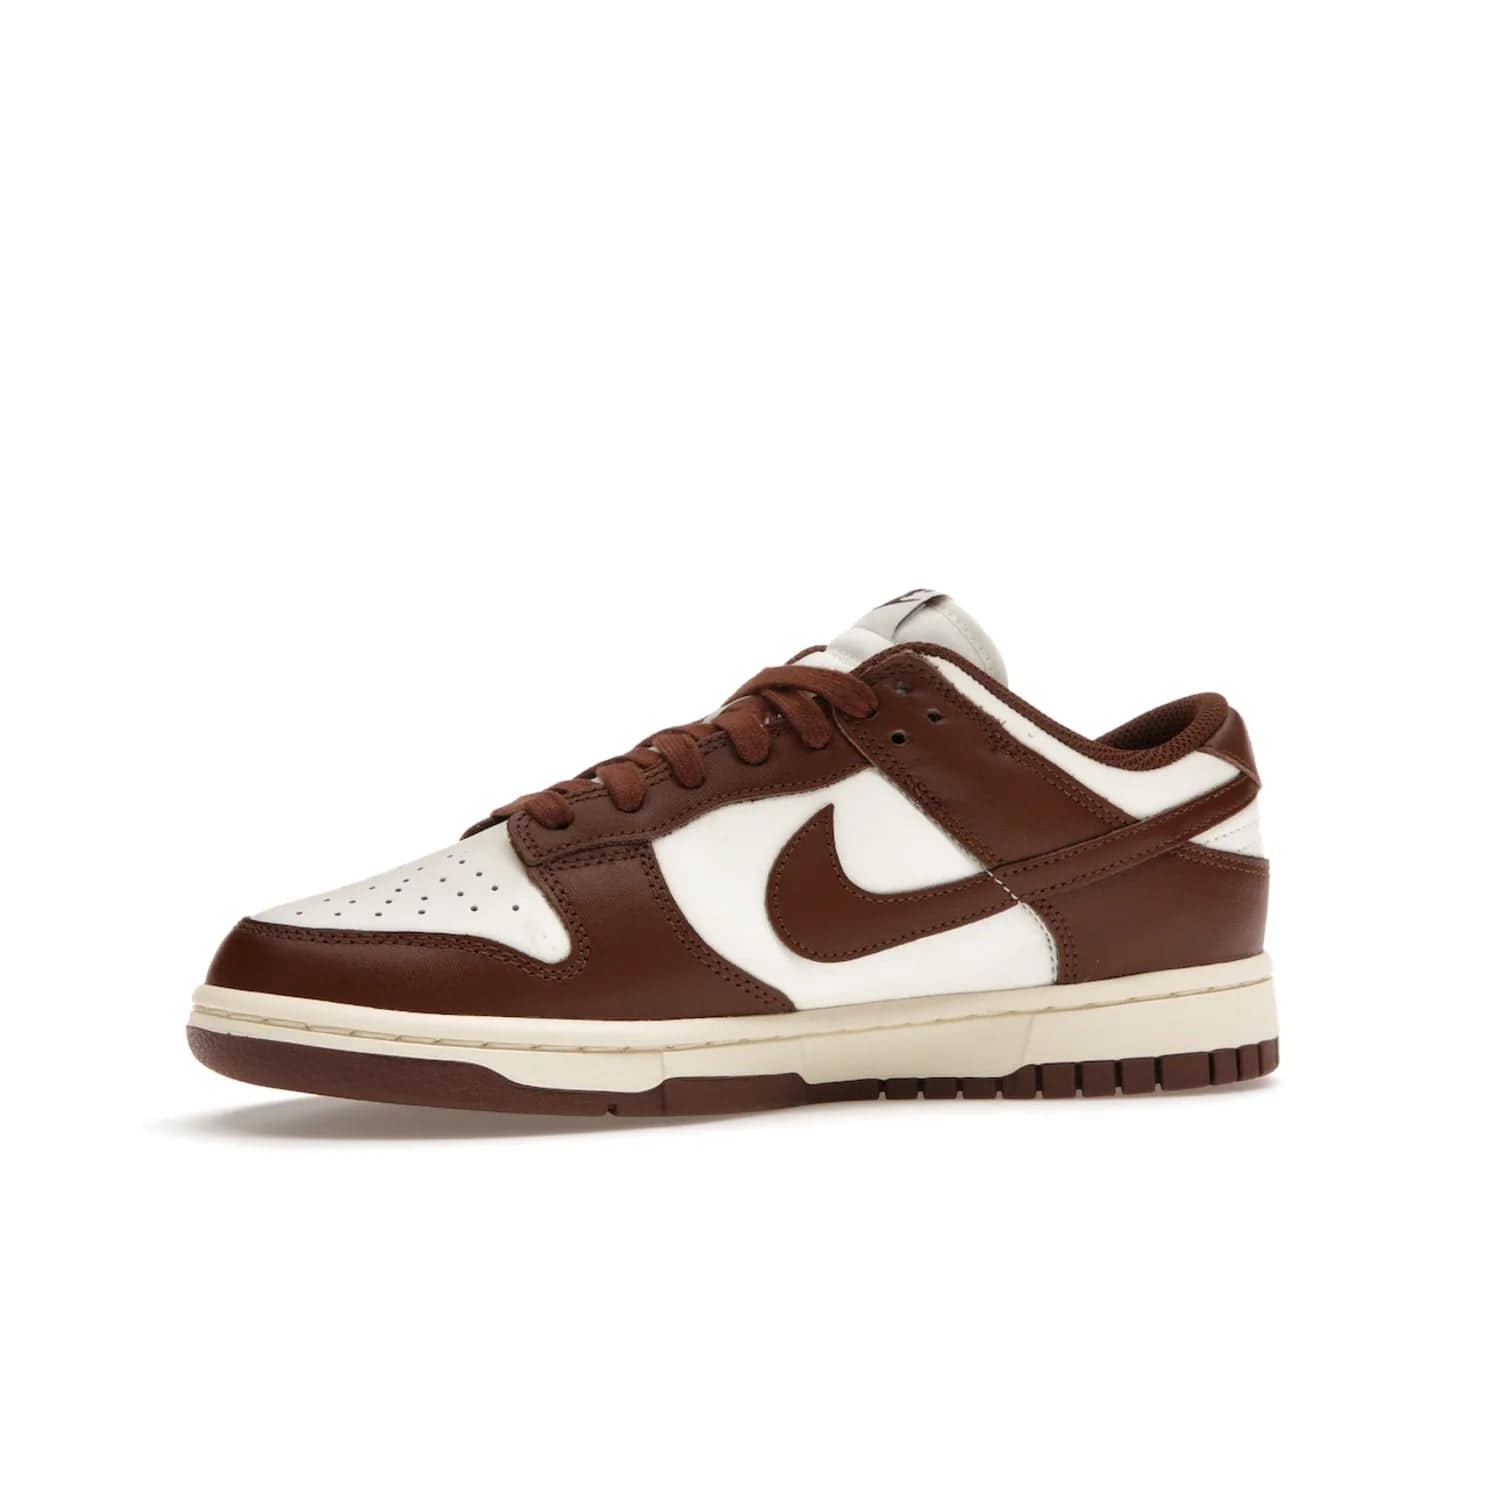 Nike Dunk Low Cacao Wow (Women's) - Image 17 - Only at www.BallersClubKickz.com - Revised
Get the Nike Dunk Low Cacao Wow and make a statement! Plush leather and a cool Cacao Wow finish bring together a unique mix of comfort and fashion that will turn heads. Boosted with a Coconut Milk hue. Shop today.